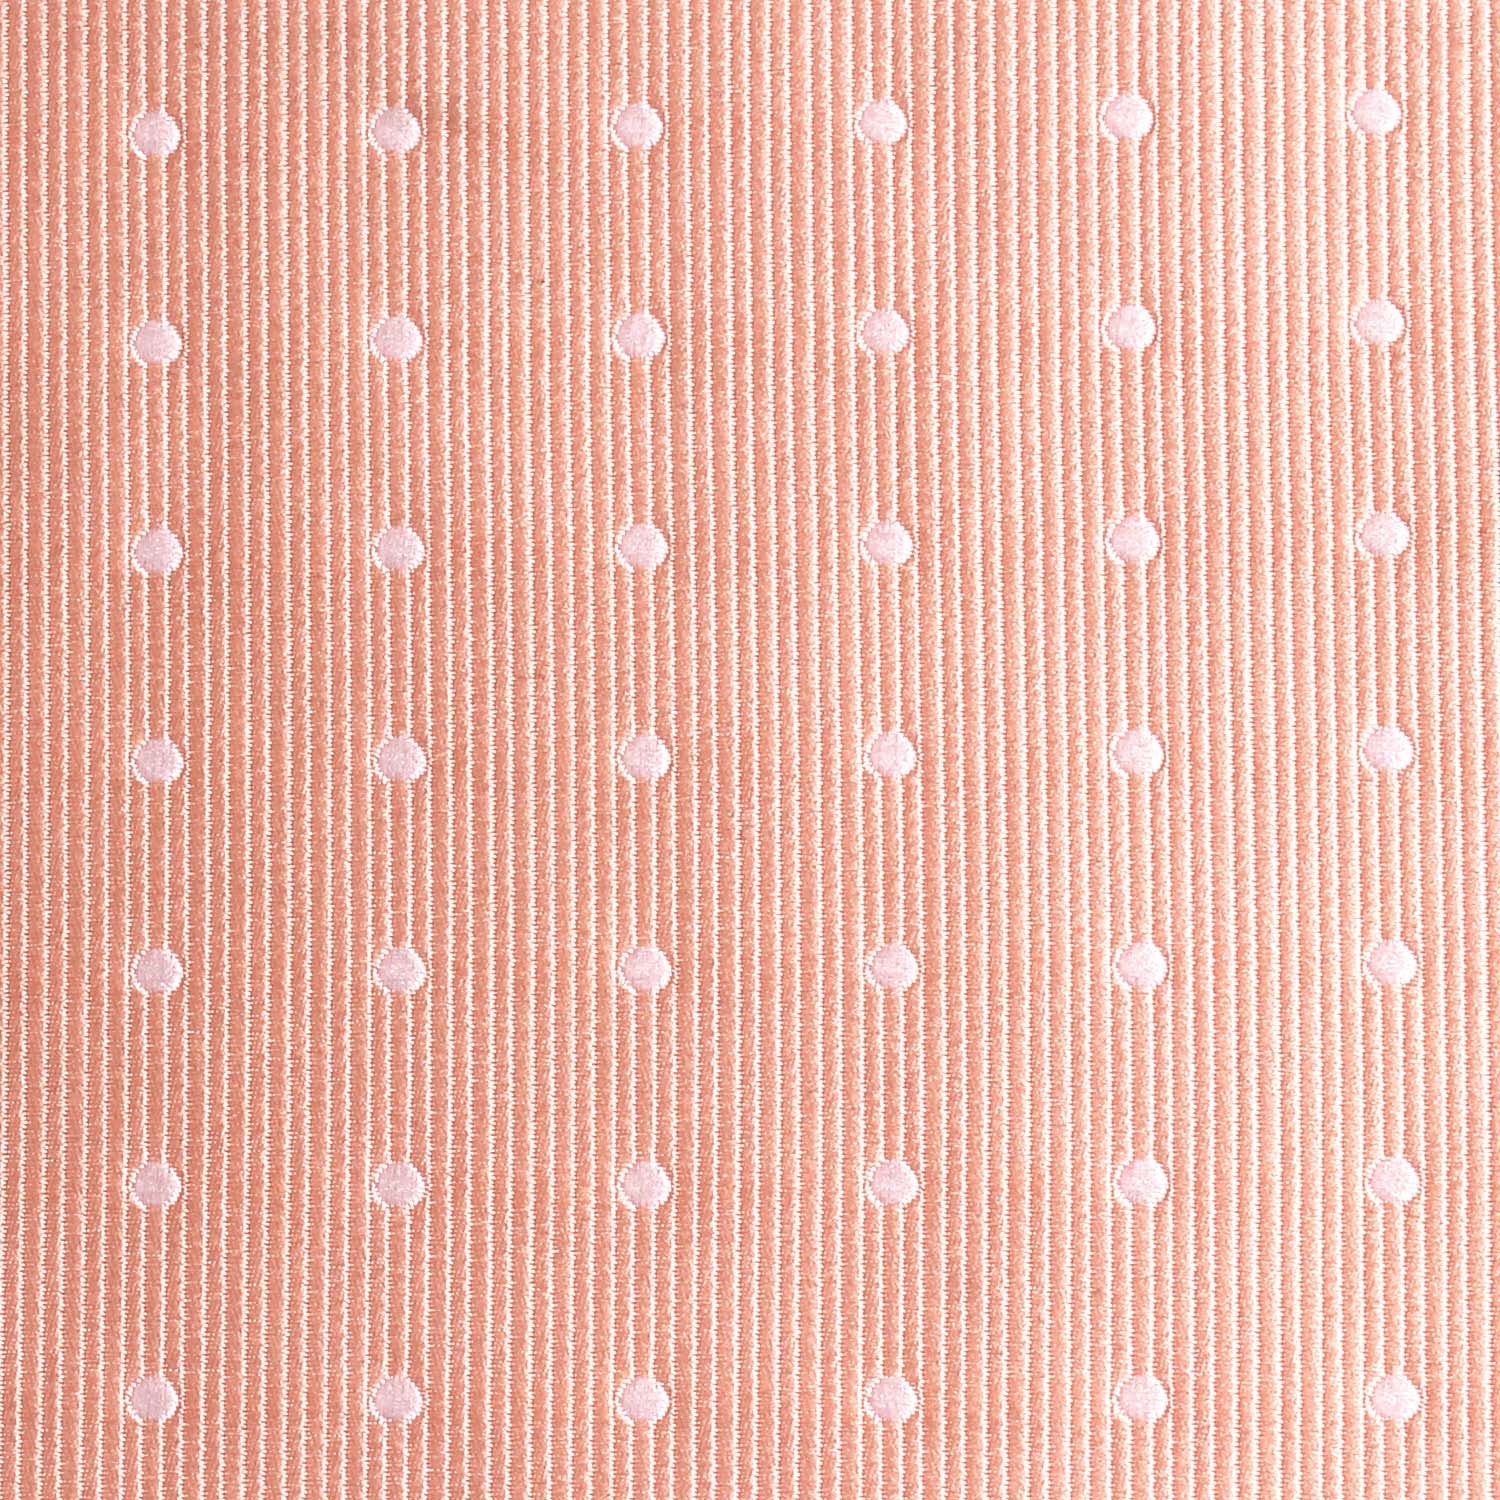 Peach with White Polka Dots Fabric Kids Bow Tie M134